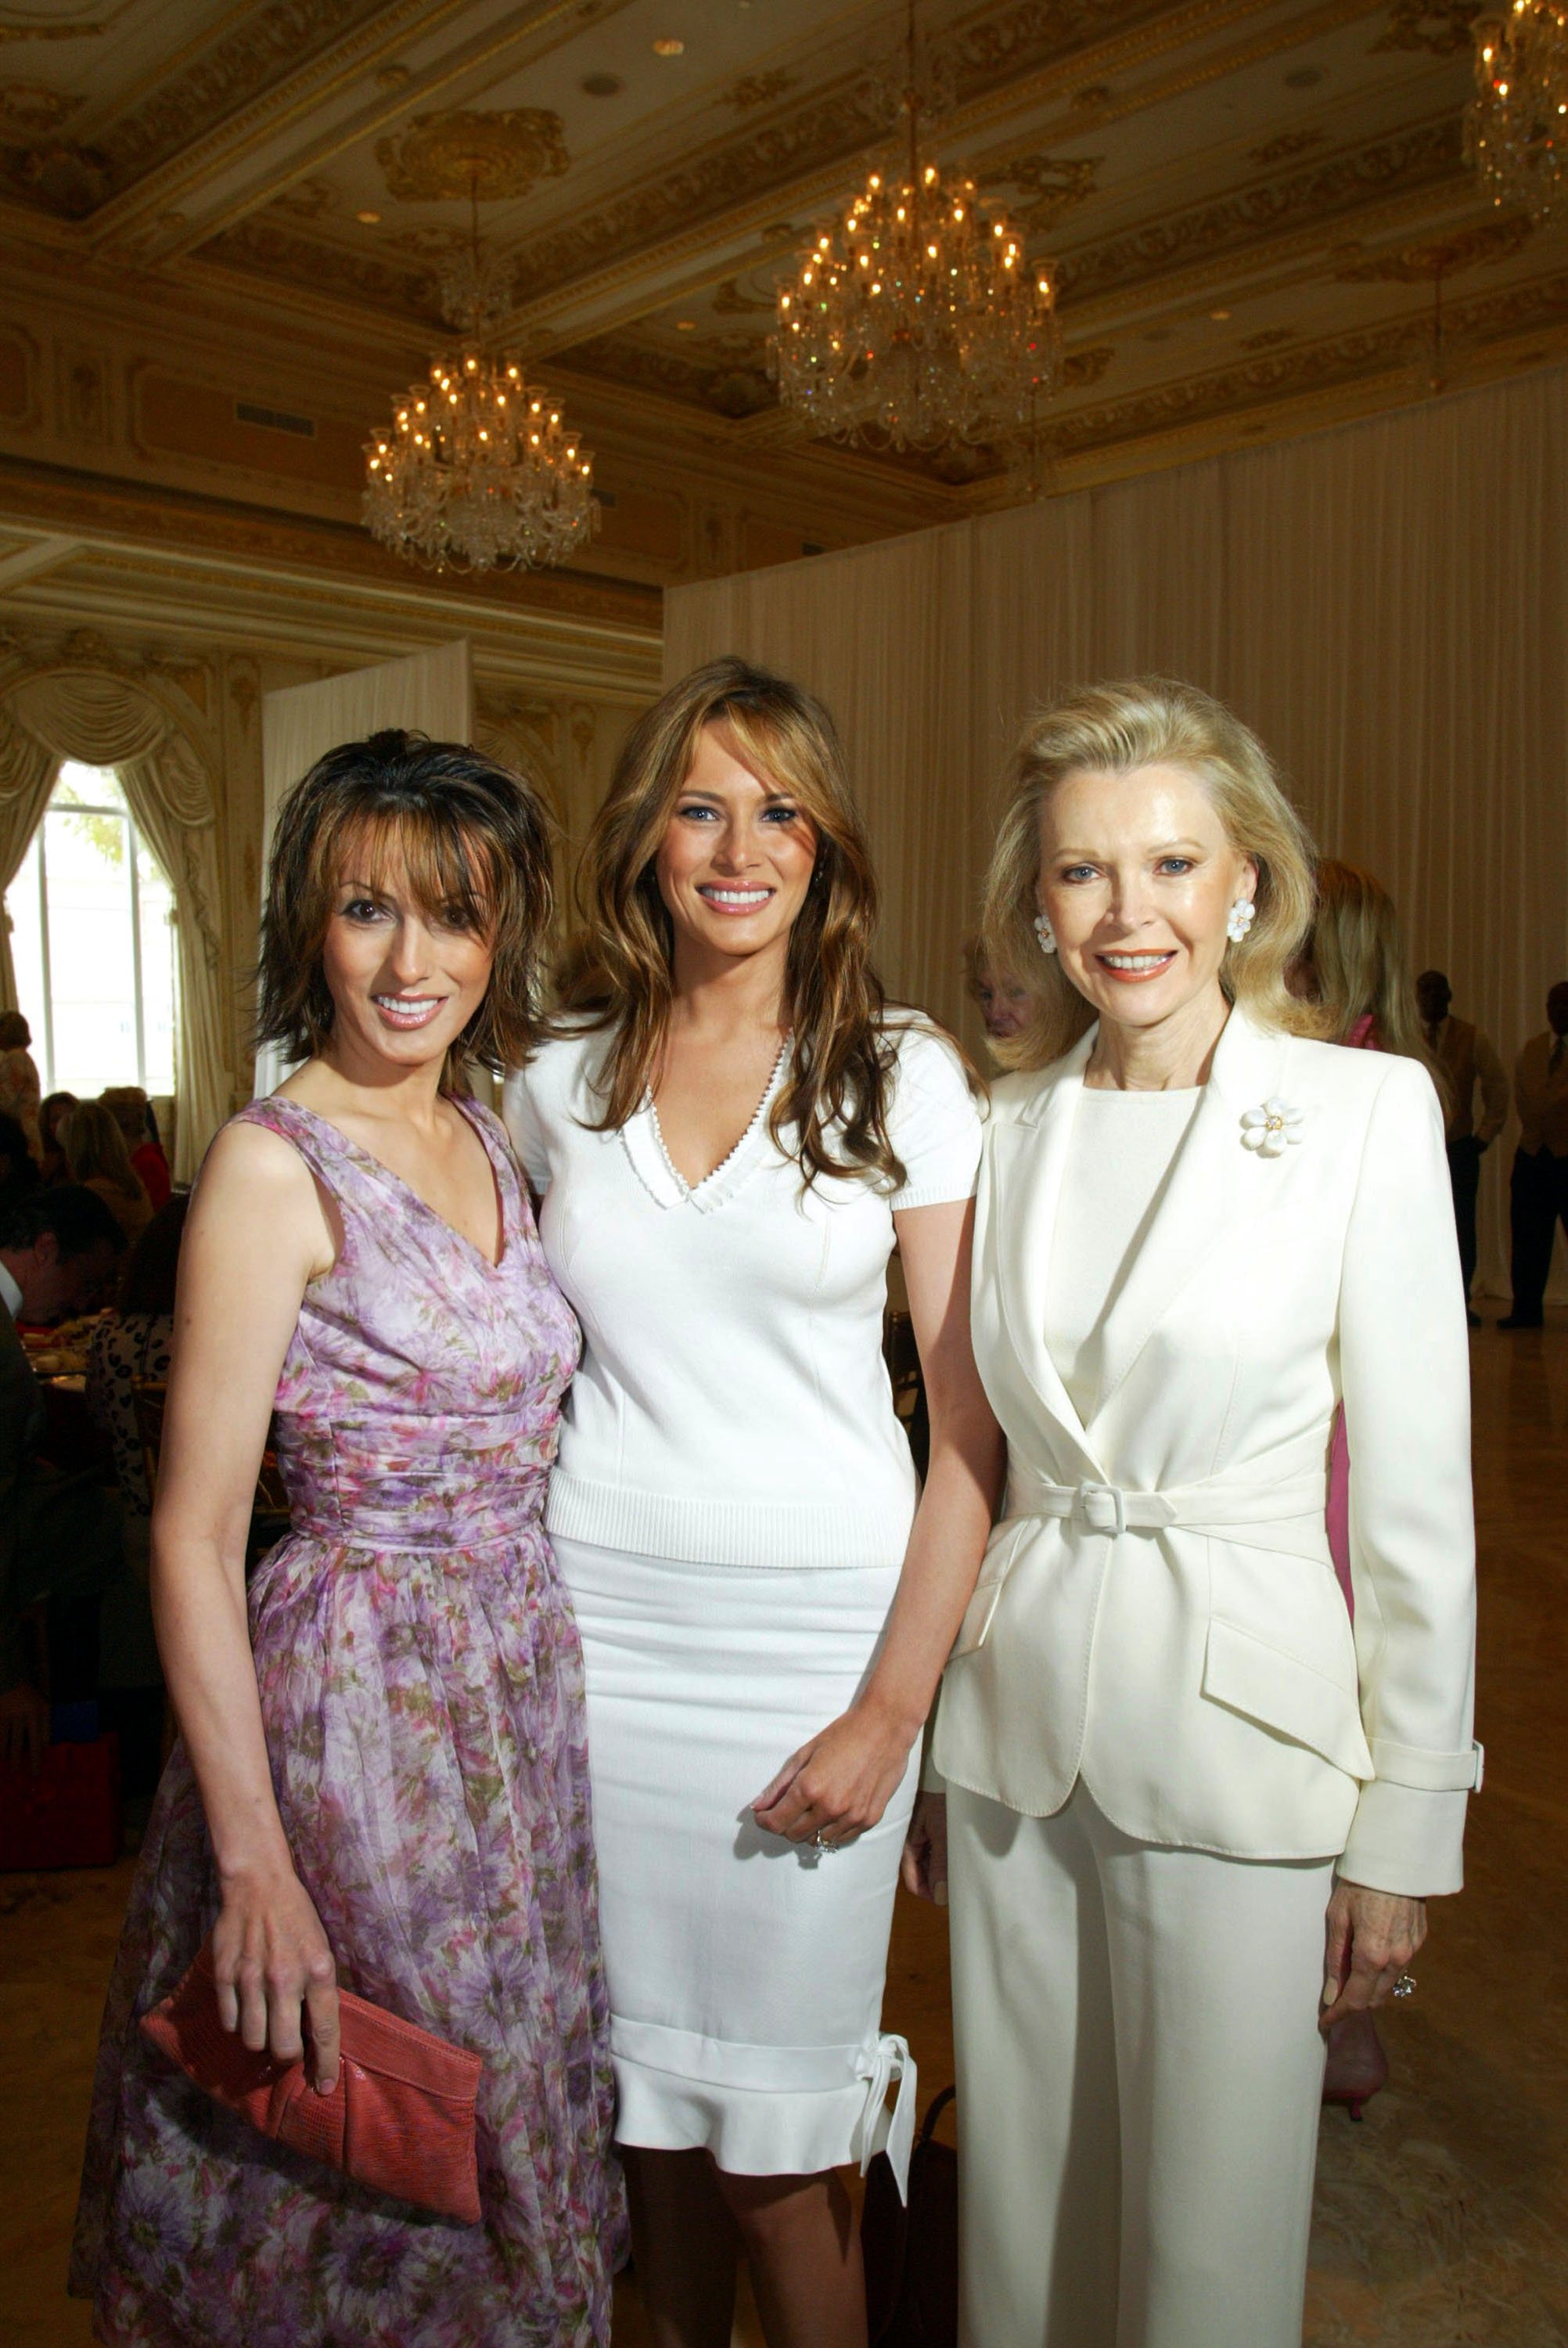 Ines Knauss, Melania Trump, and Audrey Gruss attend the Valentino Fashion Luncheon at Mar-a-Lago February 4, 2005 | Photo: GettyImages